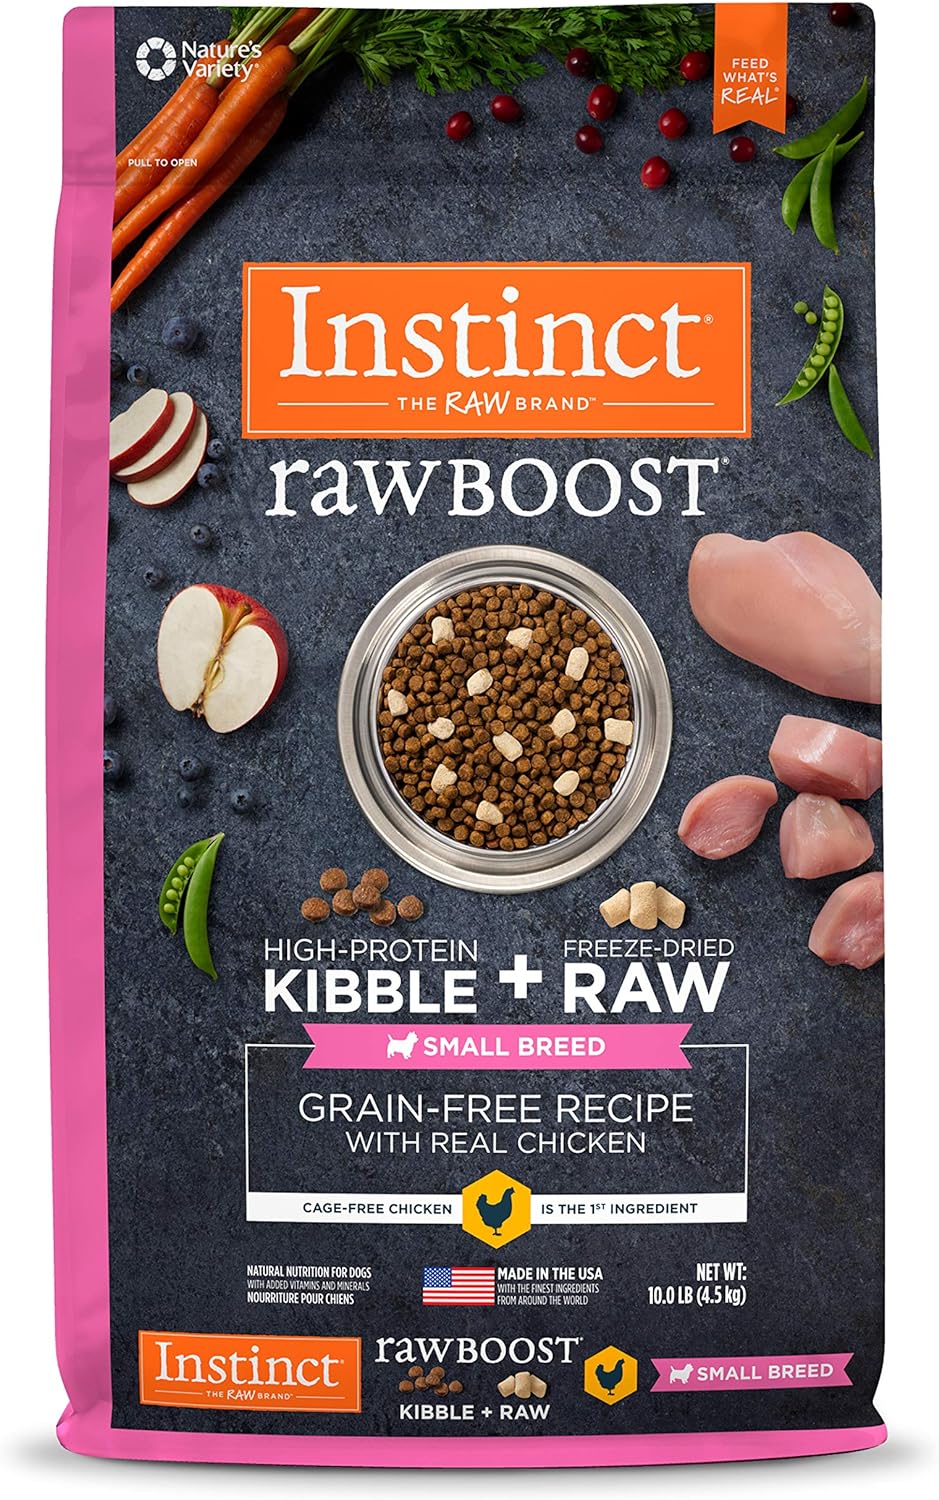 Instinct Raw Boost Grain-Free Recipe with Real Chicken for Small Breed Dogs Dry Dog Food – Gallery Image 1